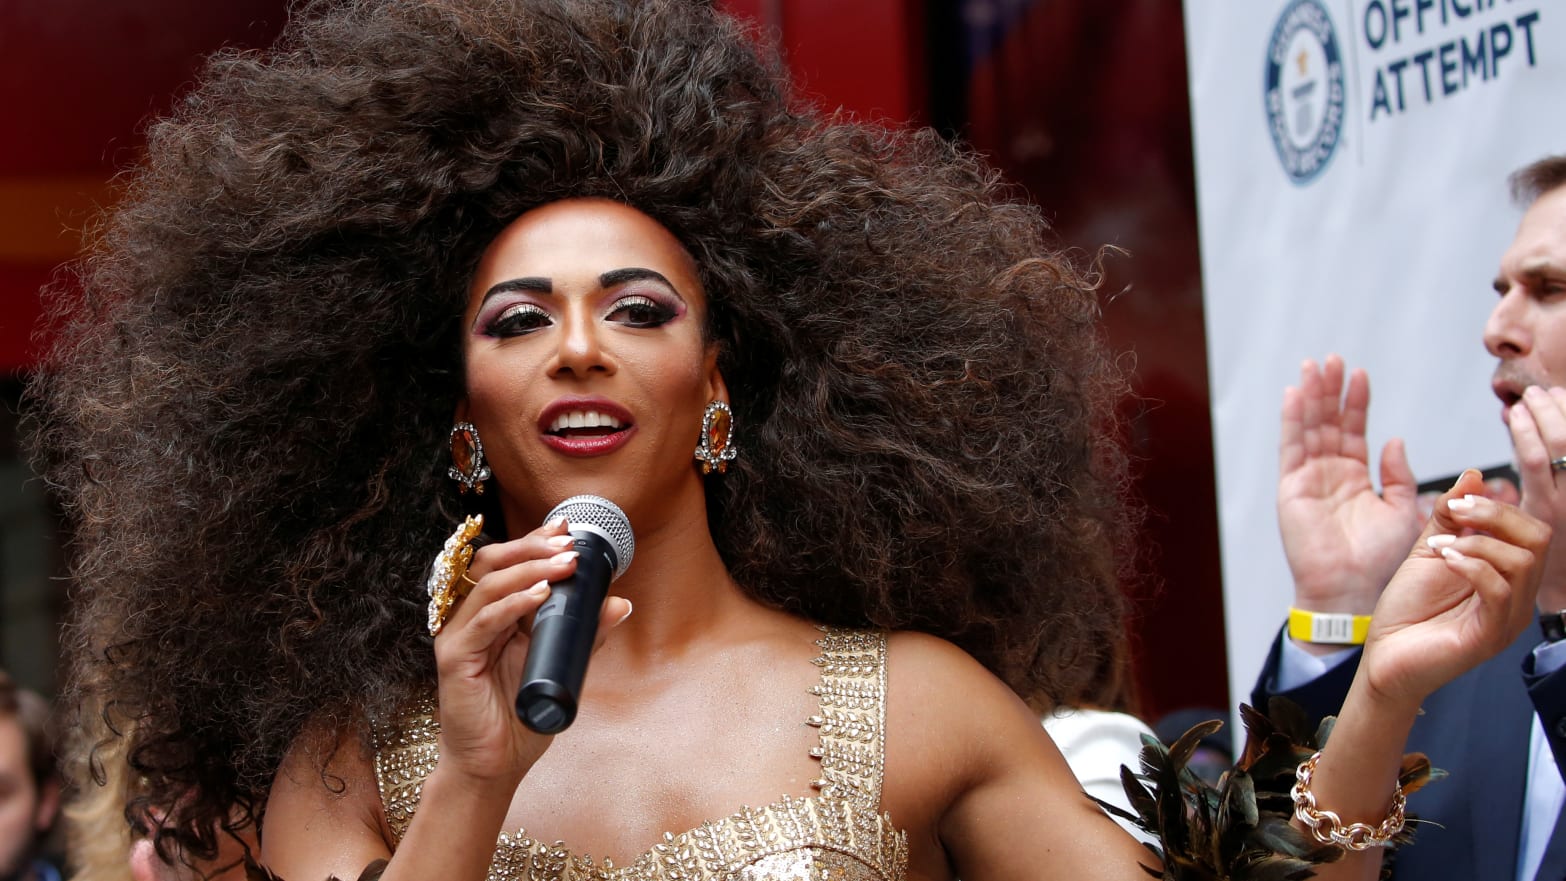 The drag queen Shangela has been accused of raping a former production assistant.